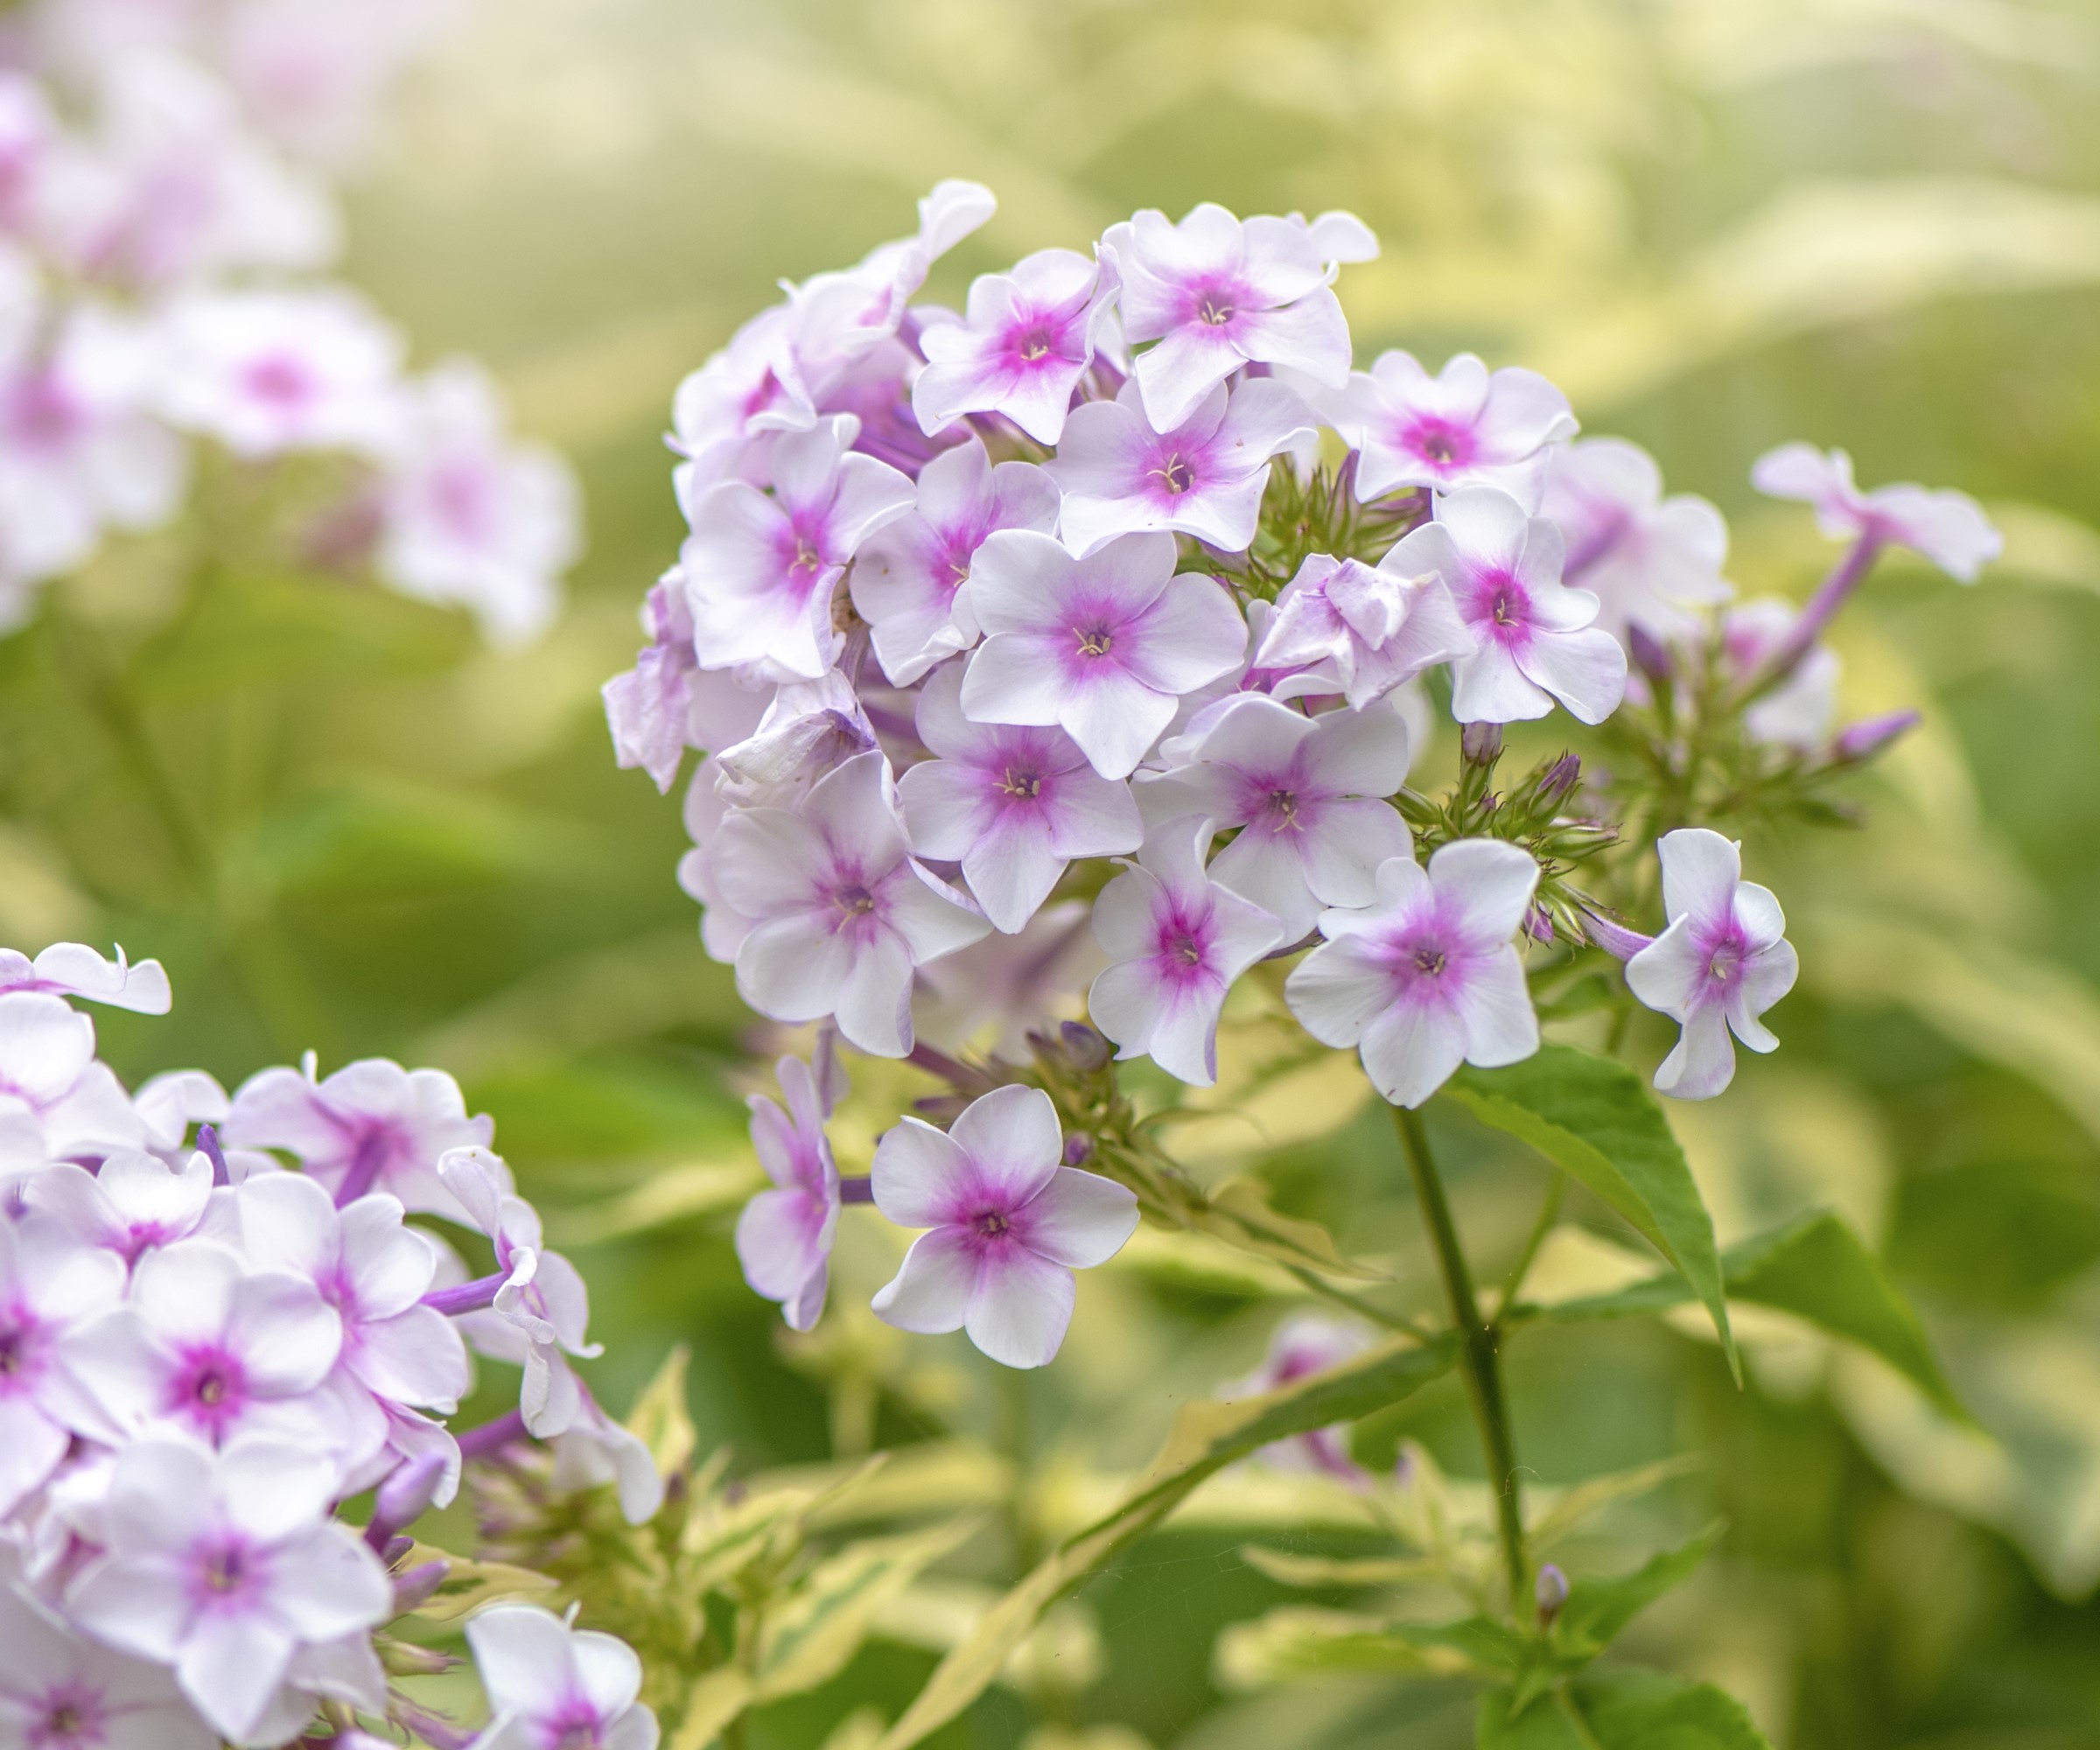 Pink and white phlox flowers